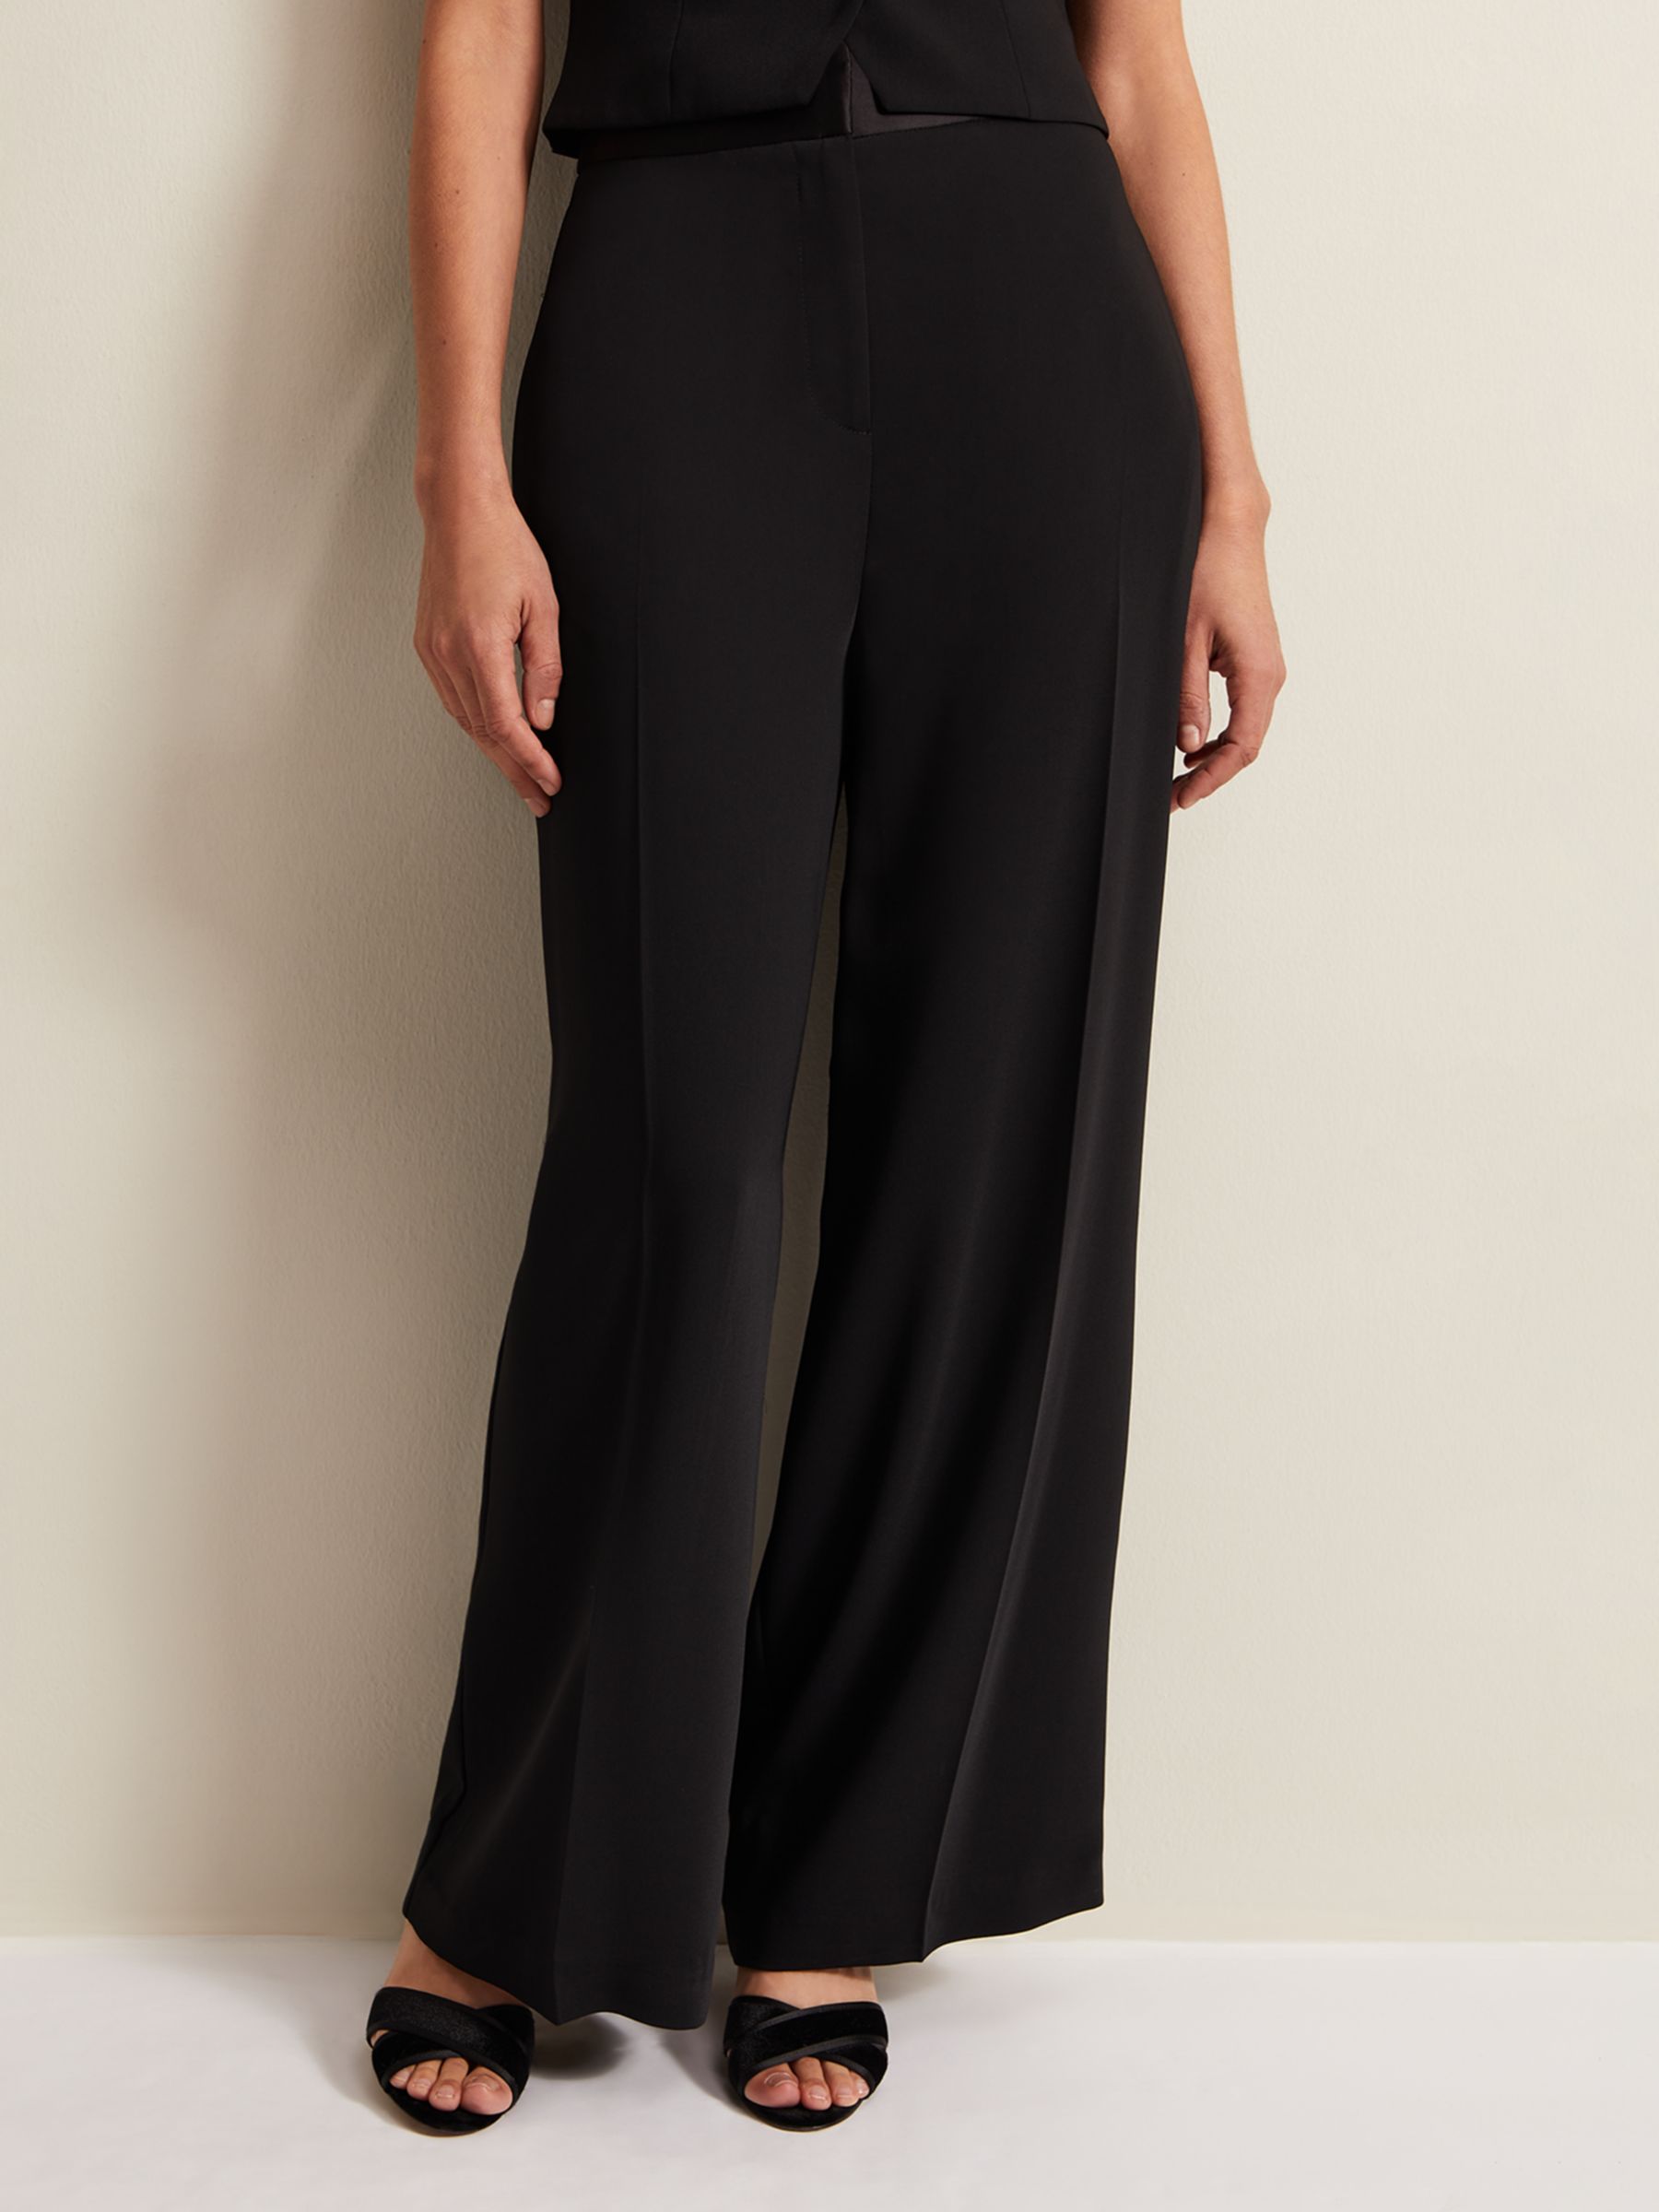 Buy Phase Eight Black Sabrina Zip Hem Ponte Trousers from the Next